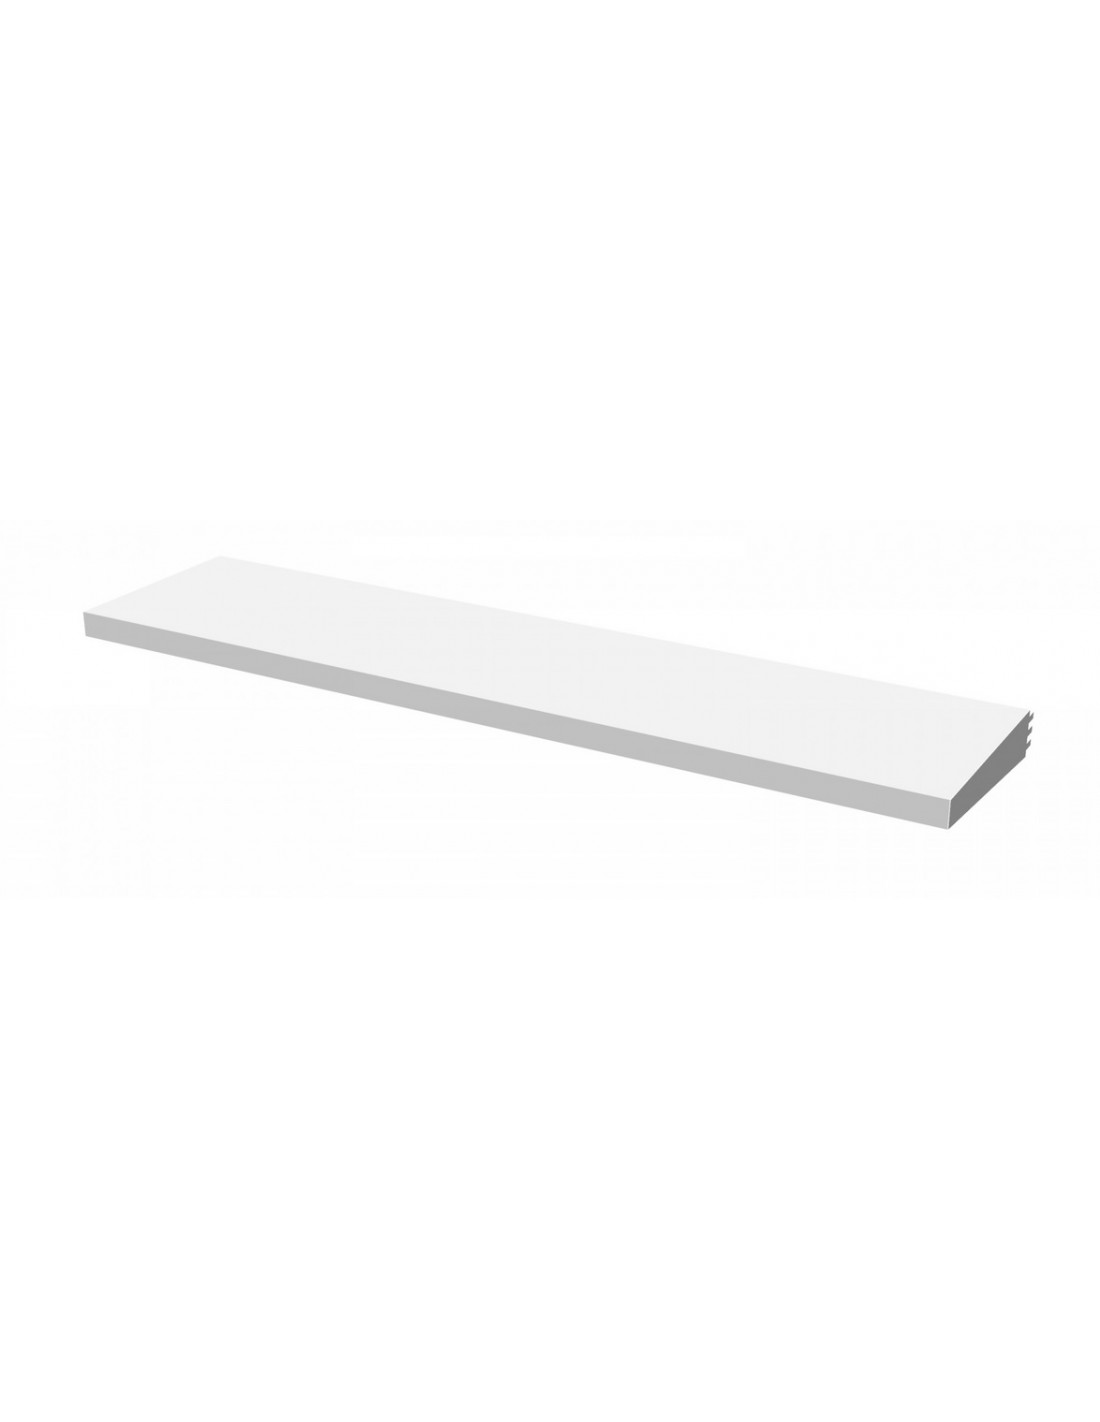 Additional shelf in 80 cm white painted sheet - For mod. VOLCANO 60